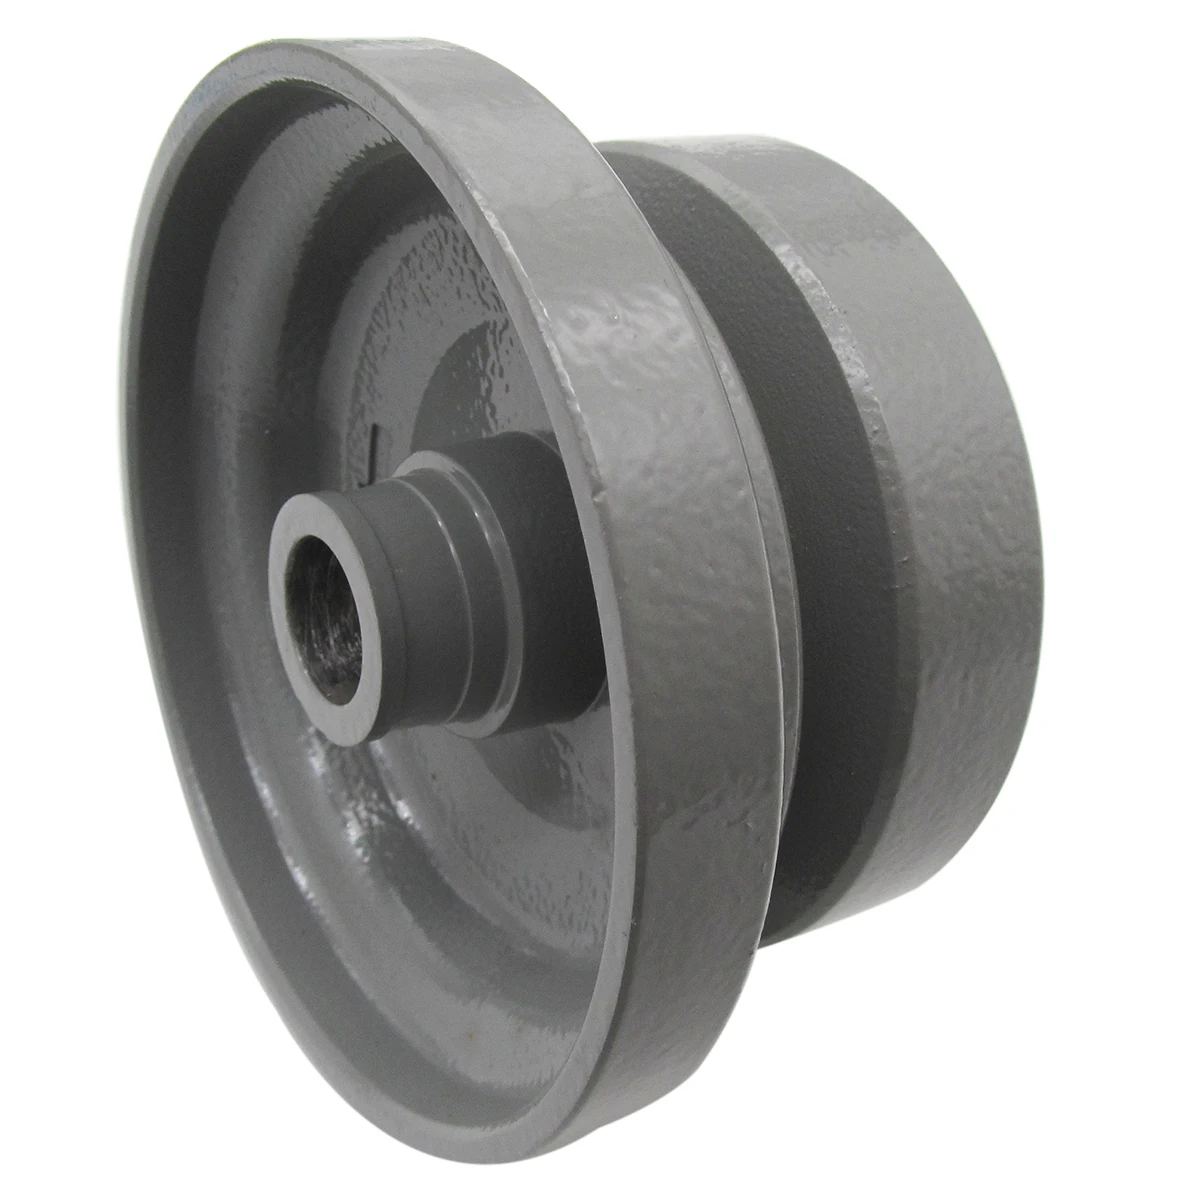 

1PCS #282180-451 MACHINE PULLEY COMPATIBLE WITH SINGER 457A105 /125/135/140/143 SEWING